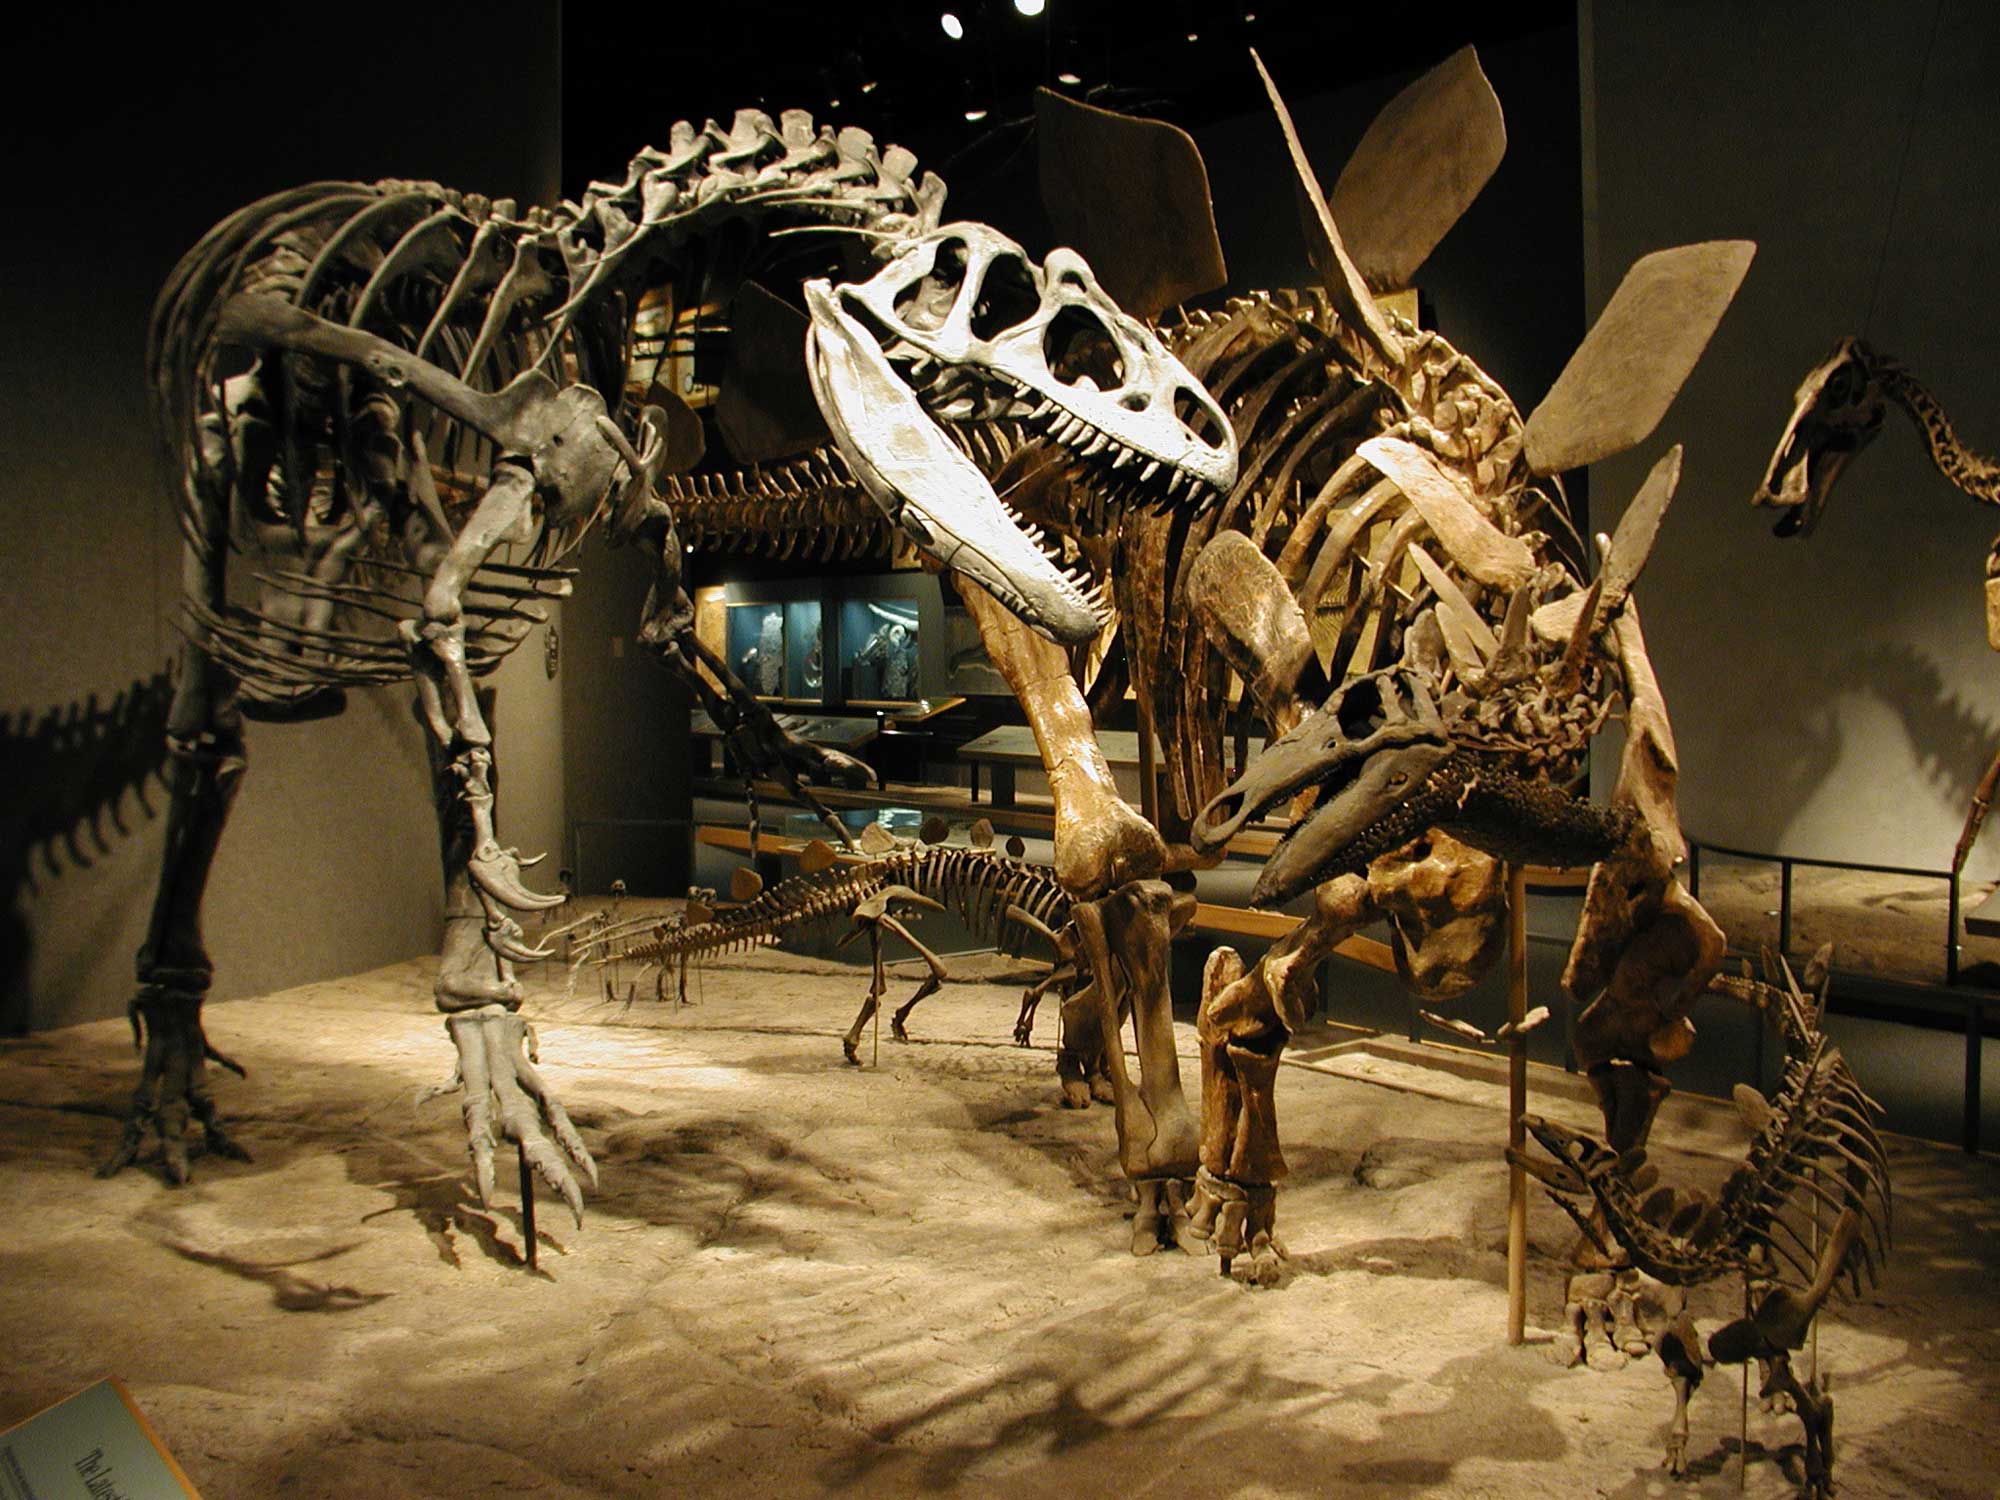 Photograph of a mounted skeleton of Stegosaurus stenops defending its young from a predatory dinosaur.